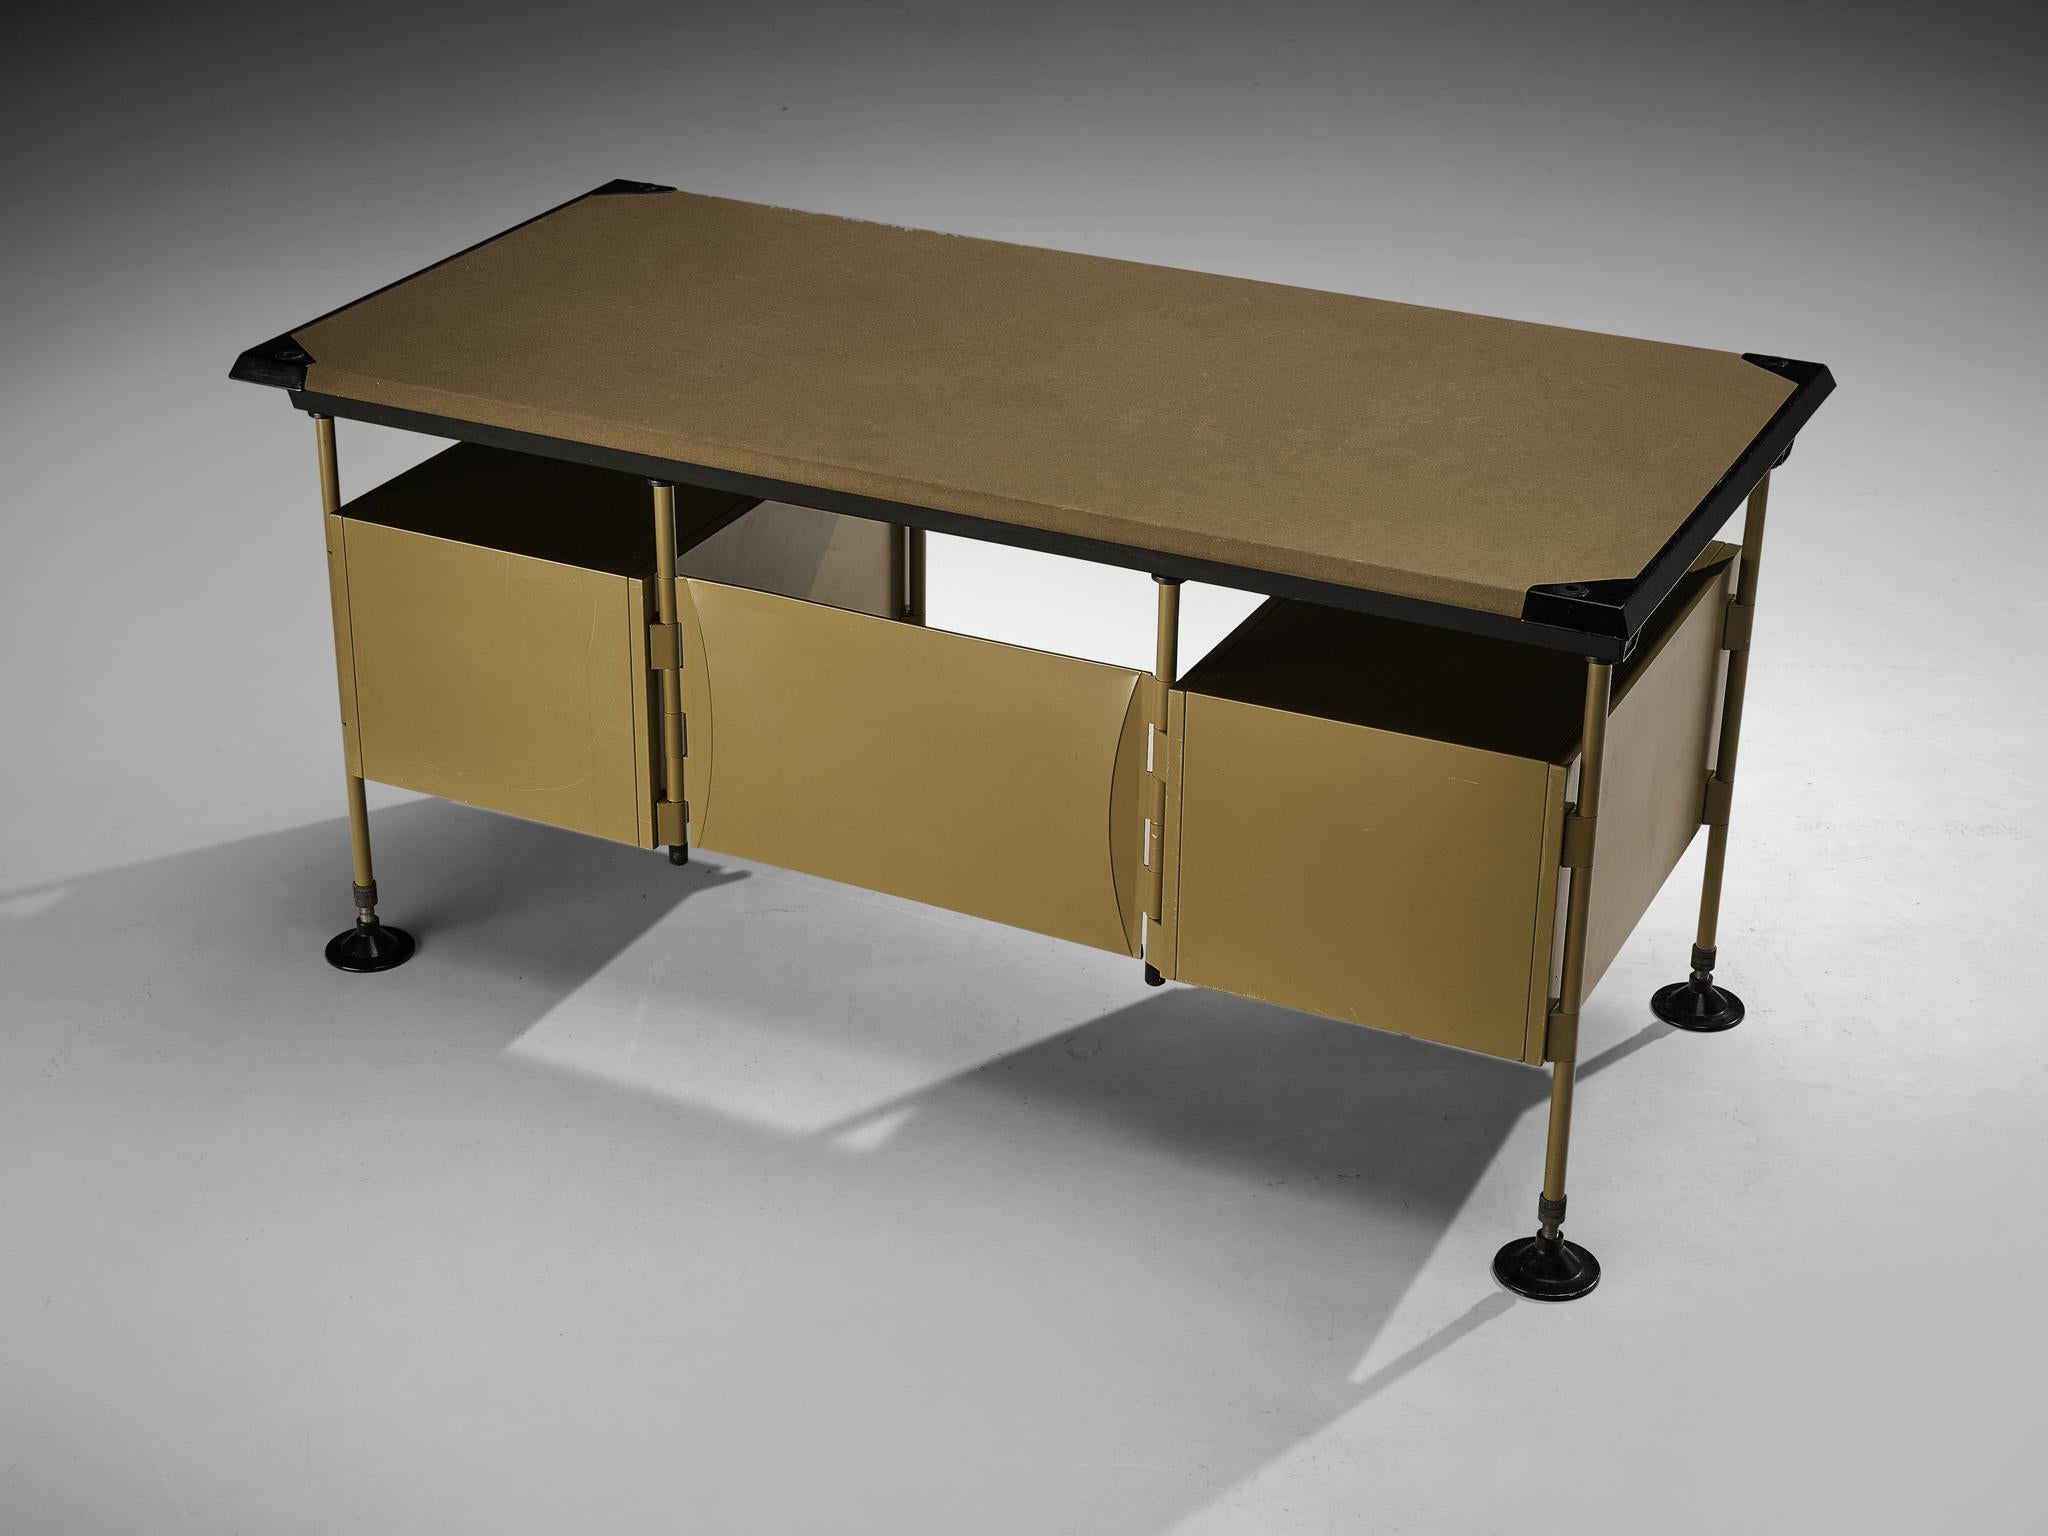 Studio BBPR for Olivetti 'Spazio' Set with Desk, Sideboard and Table  1